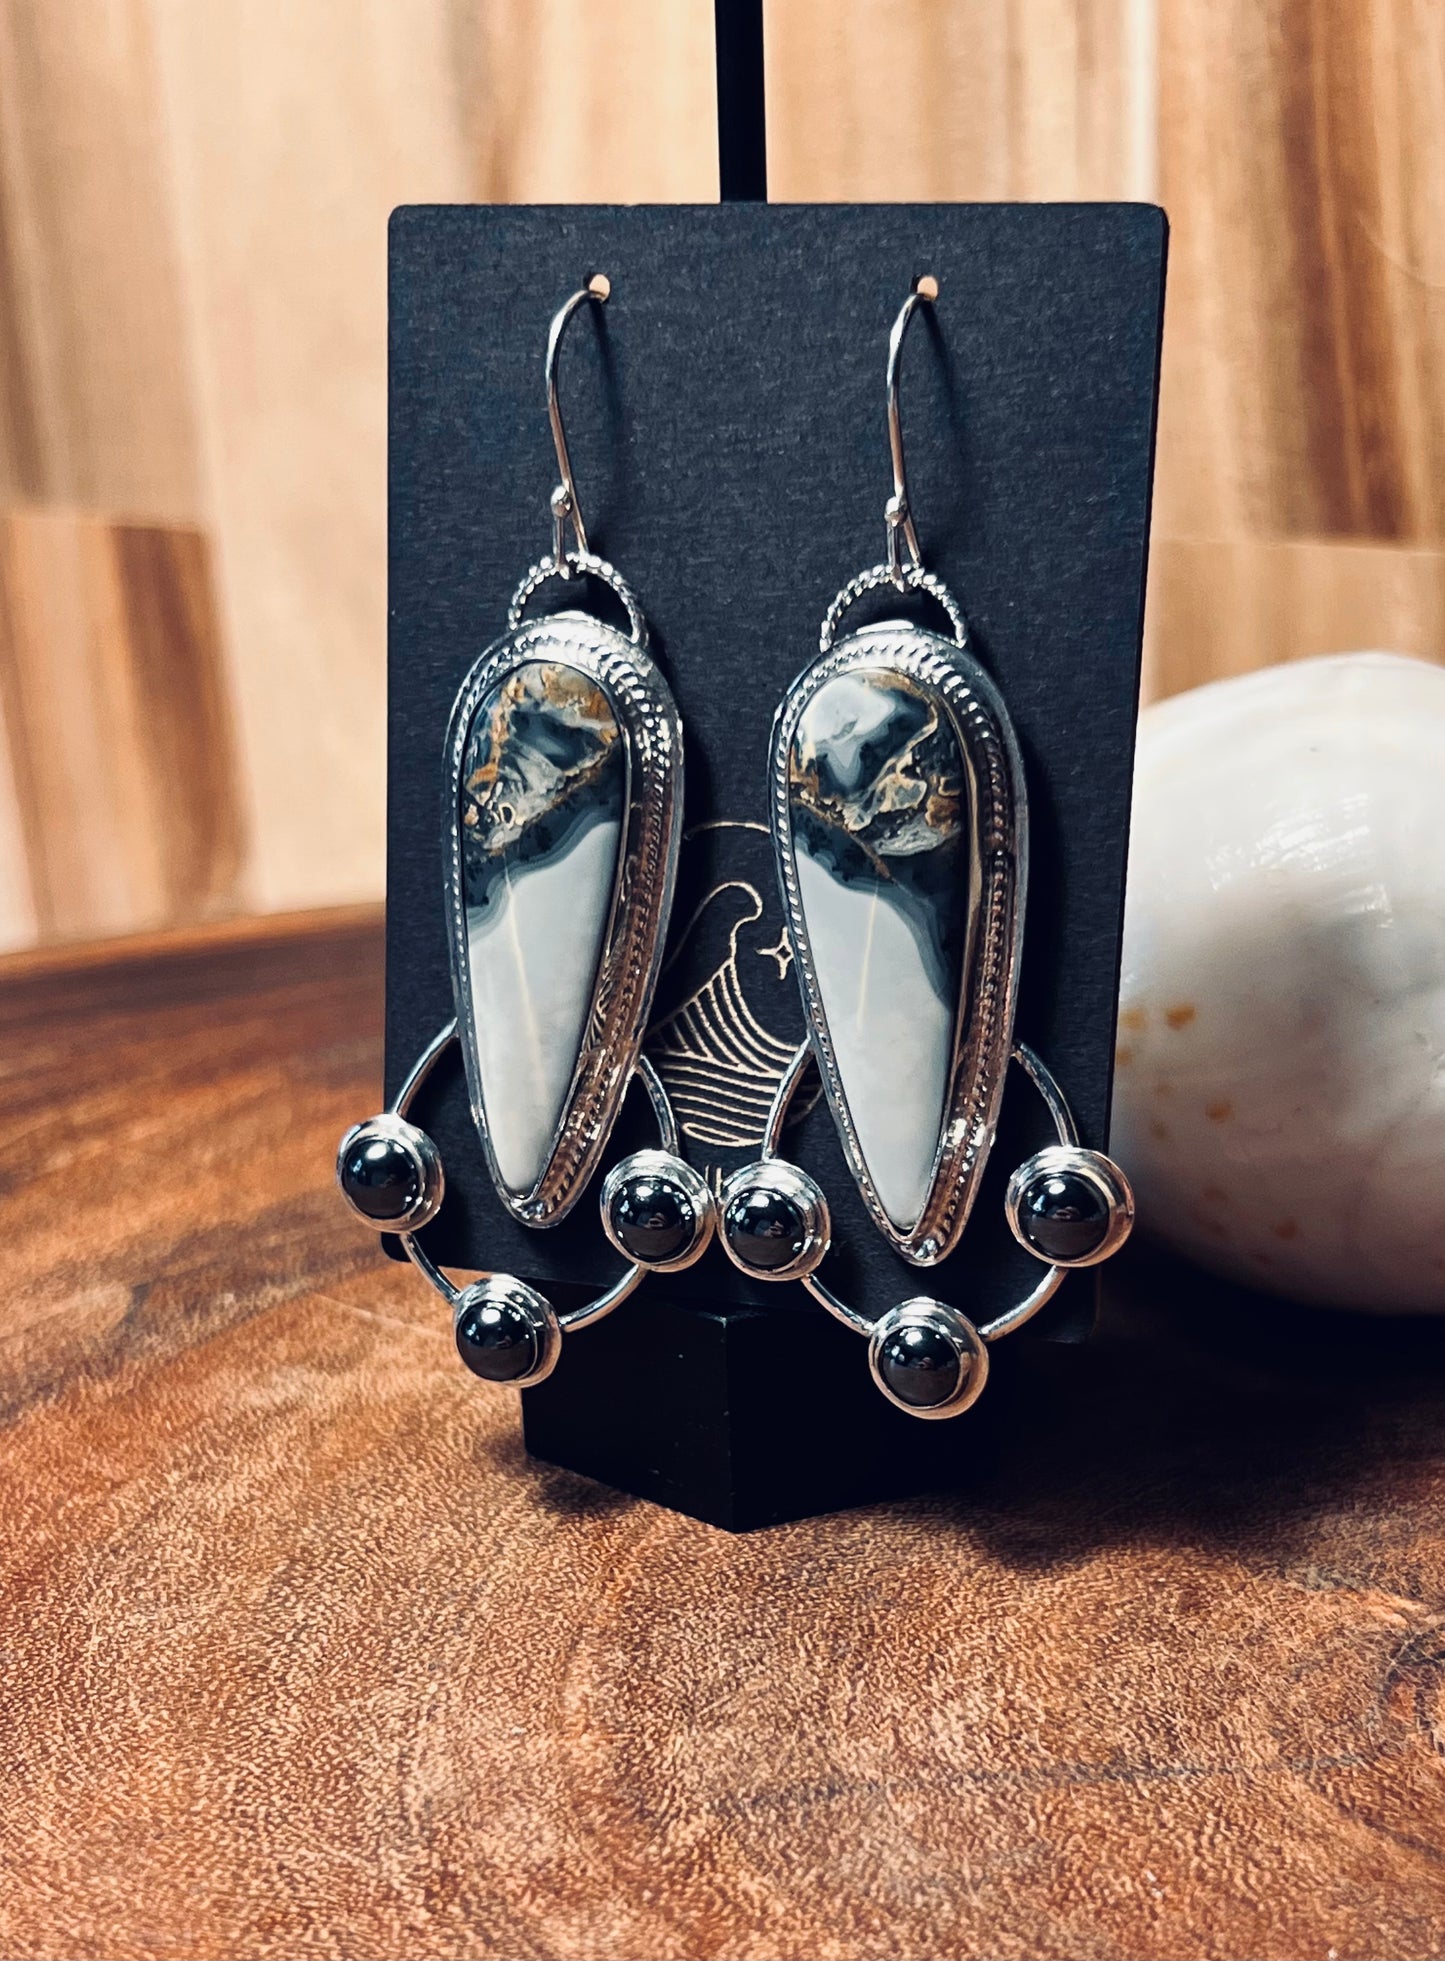 Maligano and Hematite Sterling Silver Earrings